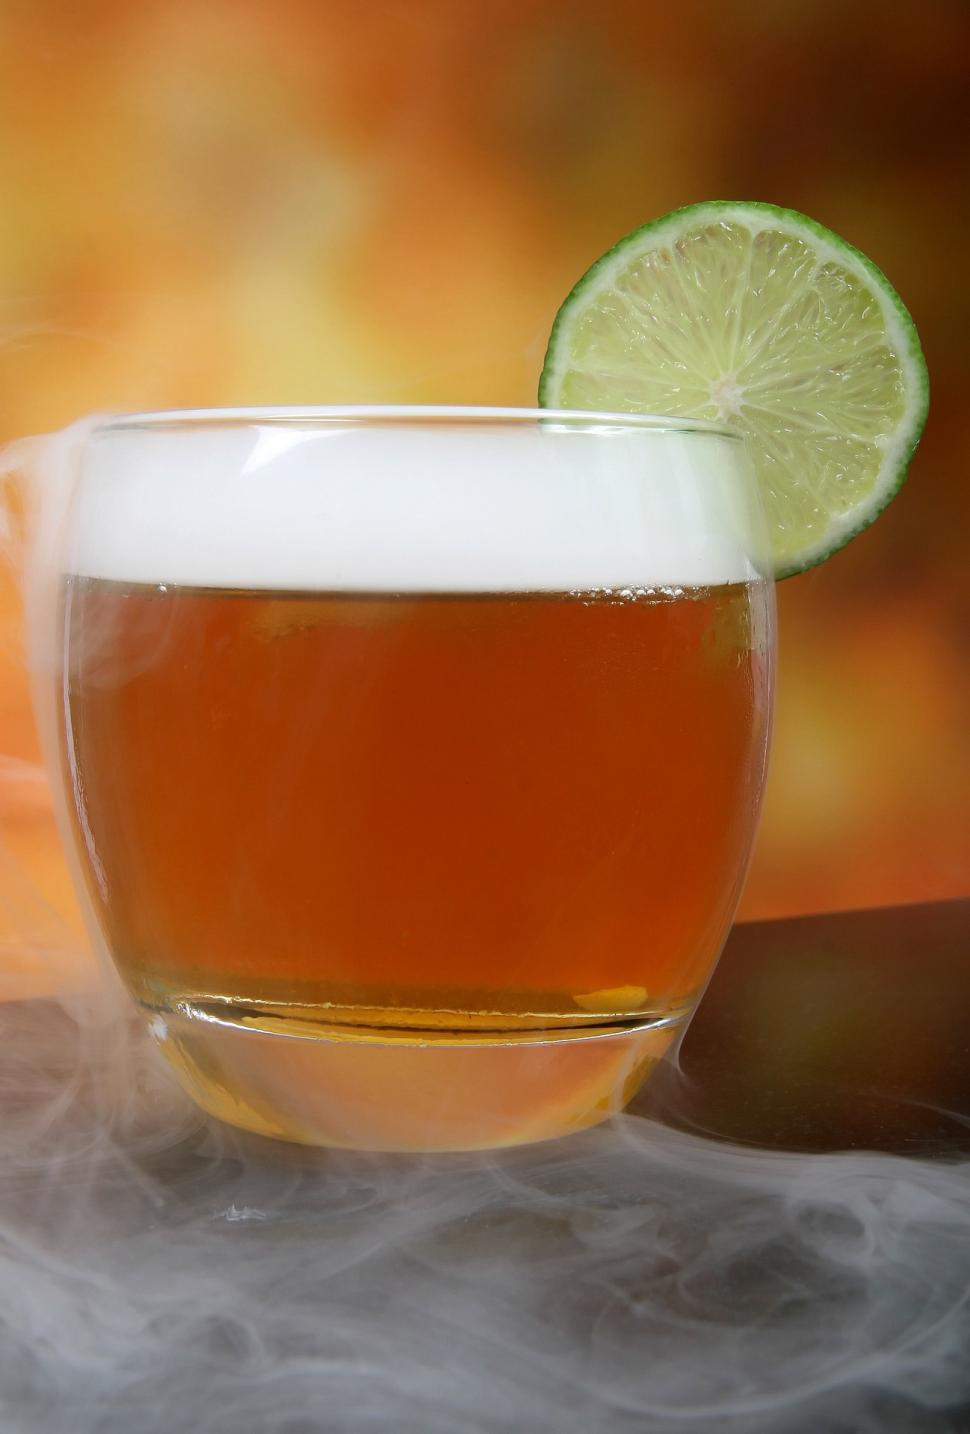 Free Image of A Cup of Tea With a Lime on Top 